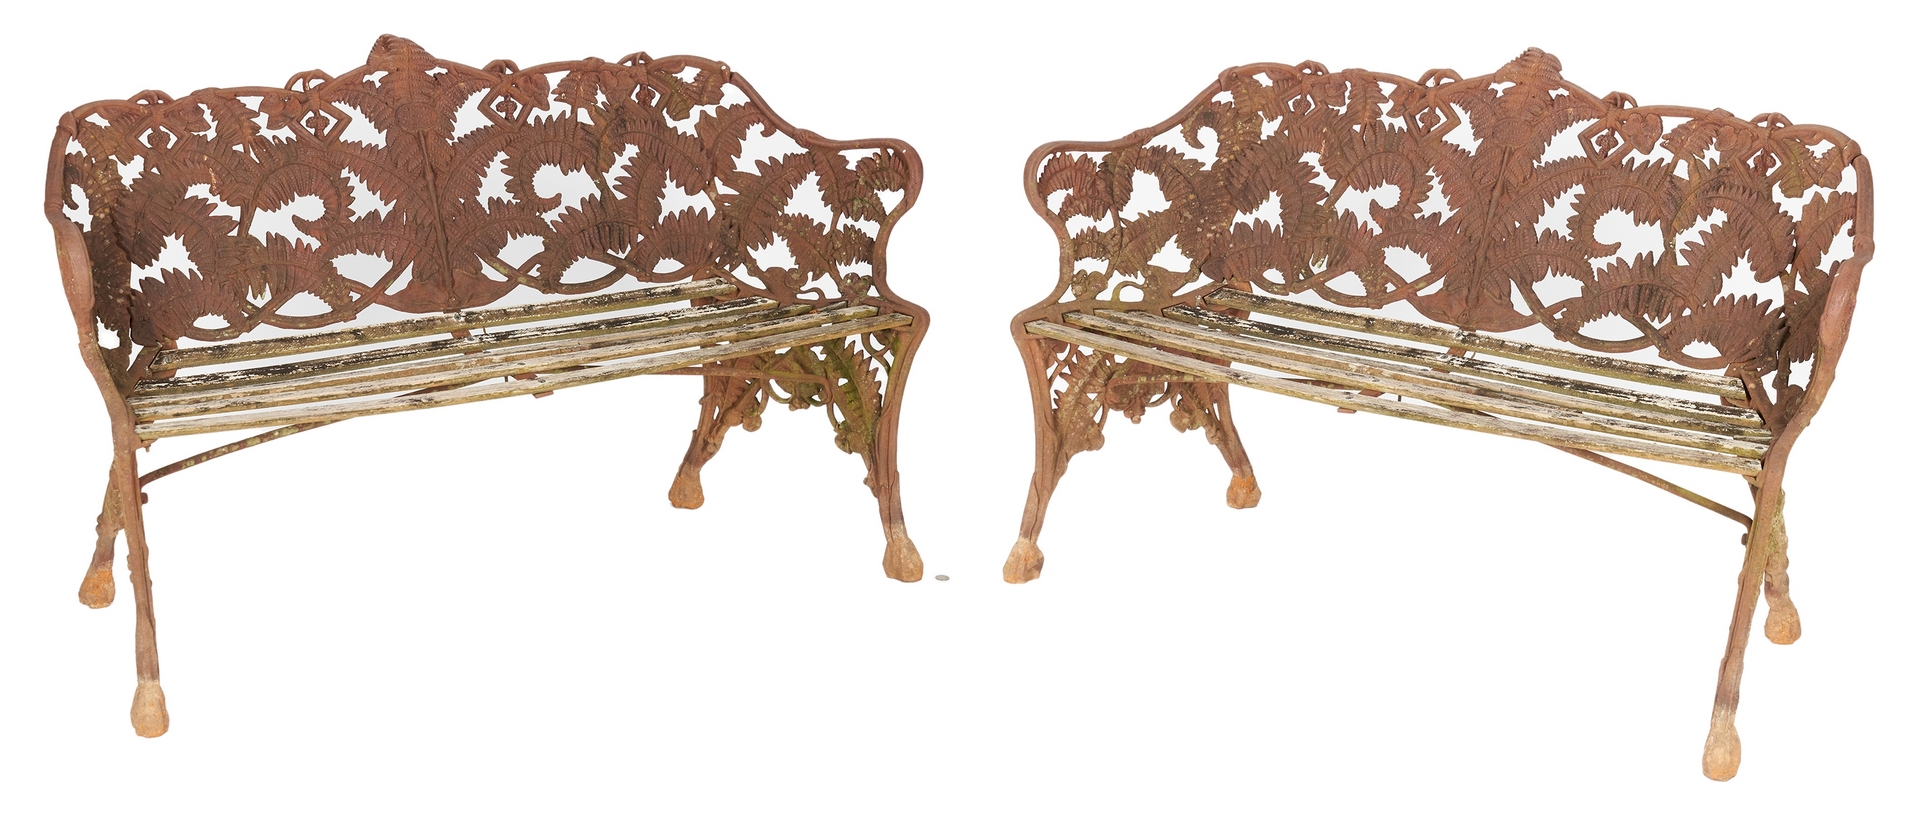 Lot 407: Near Pair Cast Iron Garden Benches, 1 signed